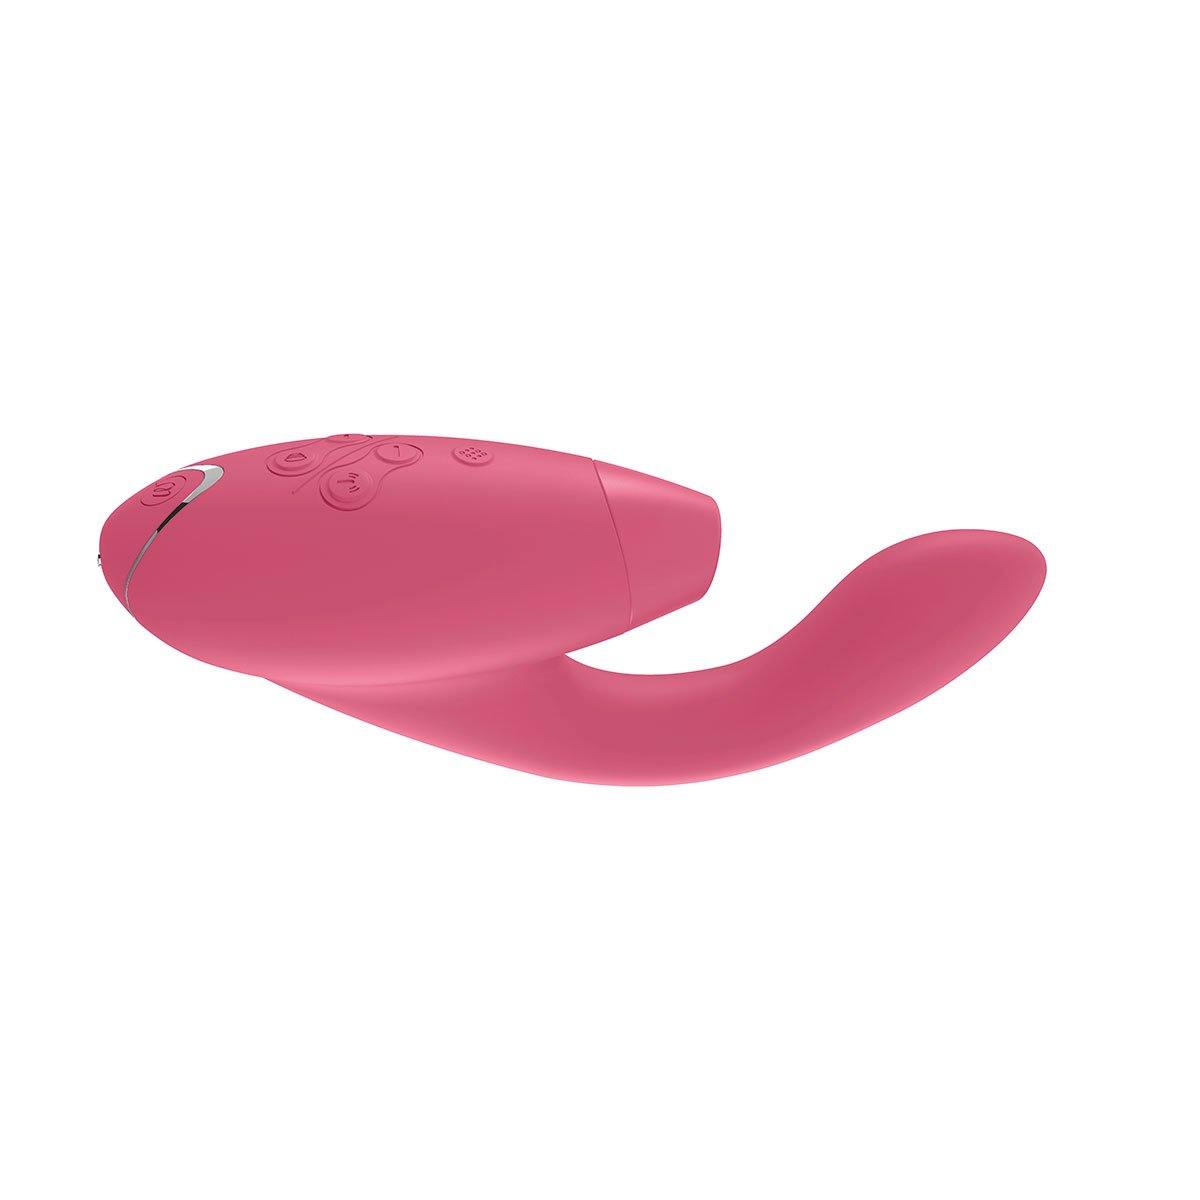 Womanizer Duo Raspberry - Buy At Luxury Toy X - Free 3-Day Shipping